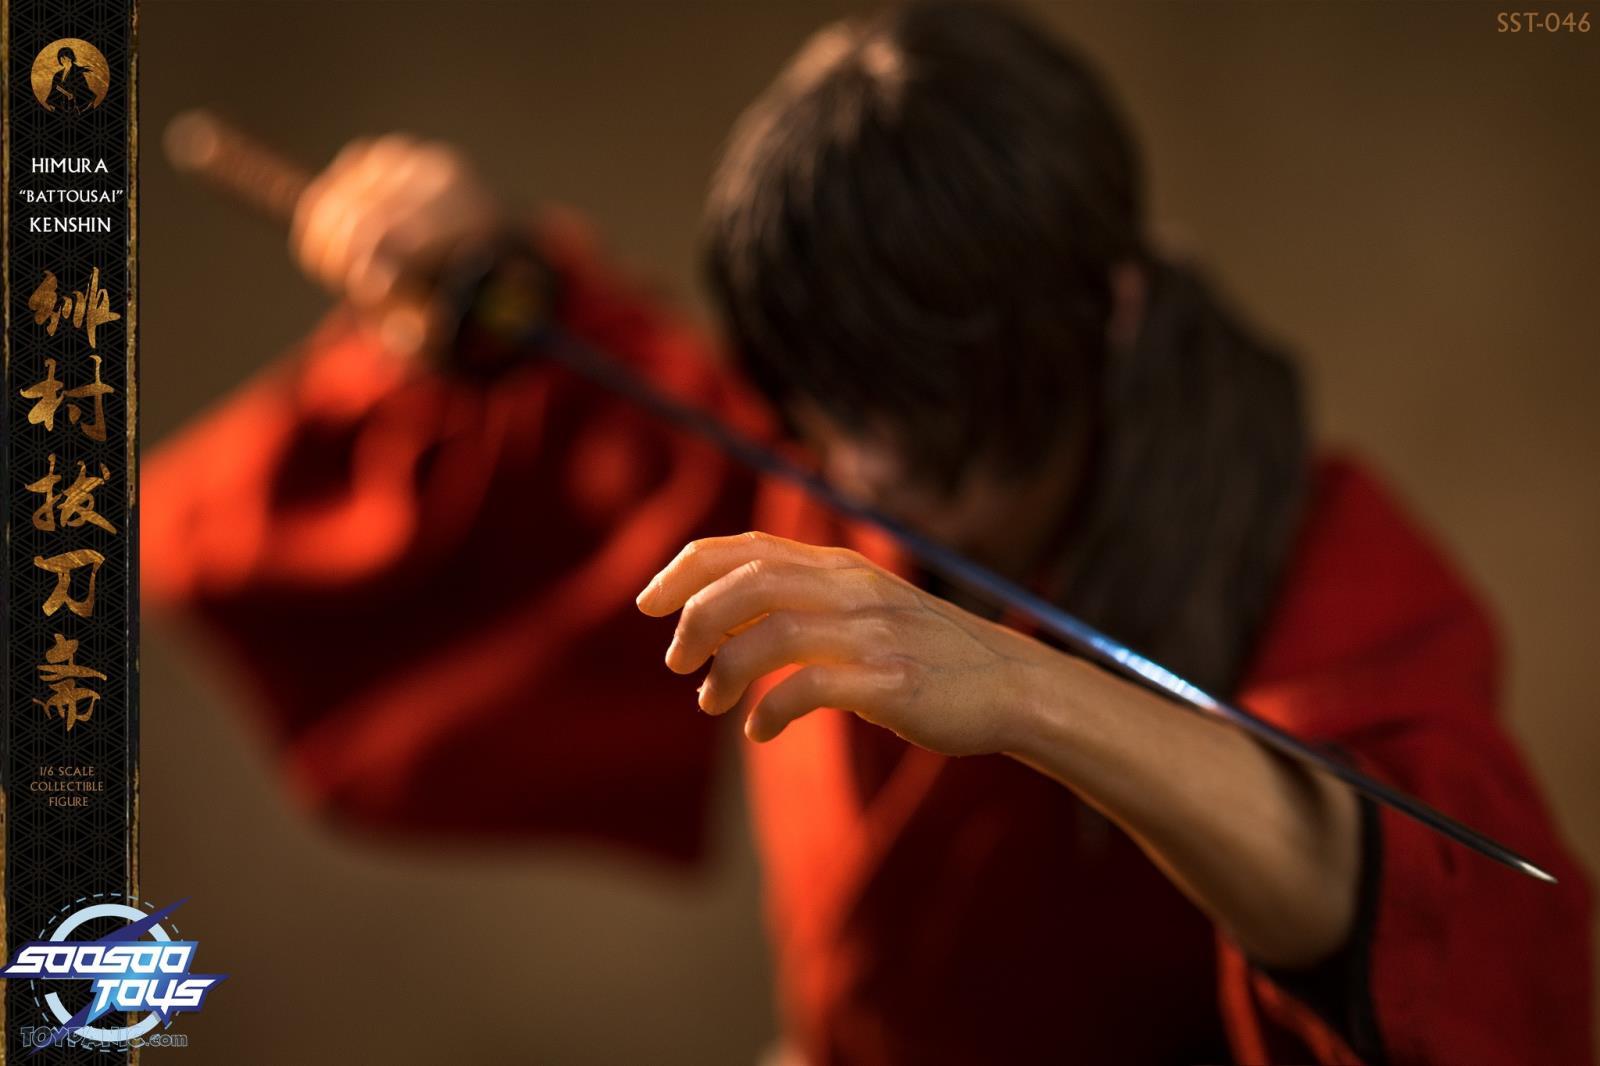 himura - NEW PRODUCT: 1/6 scale Rurouni Kenshin Collectible Figure from SooSooToys 712202251229PM_8652112